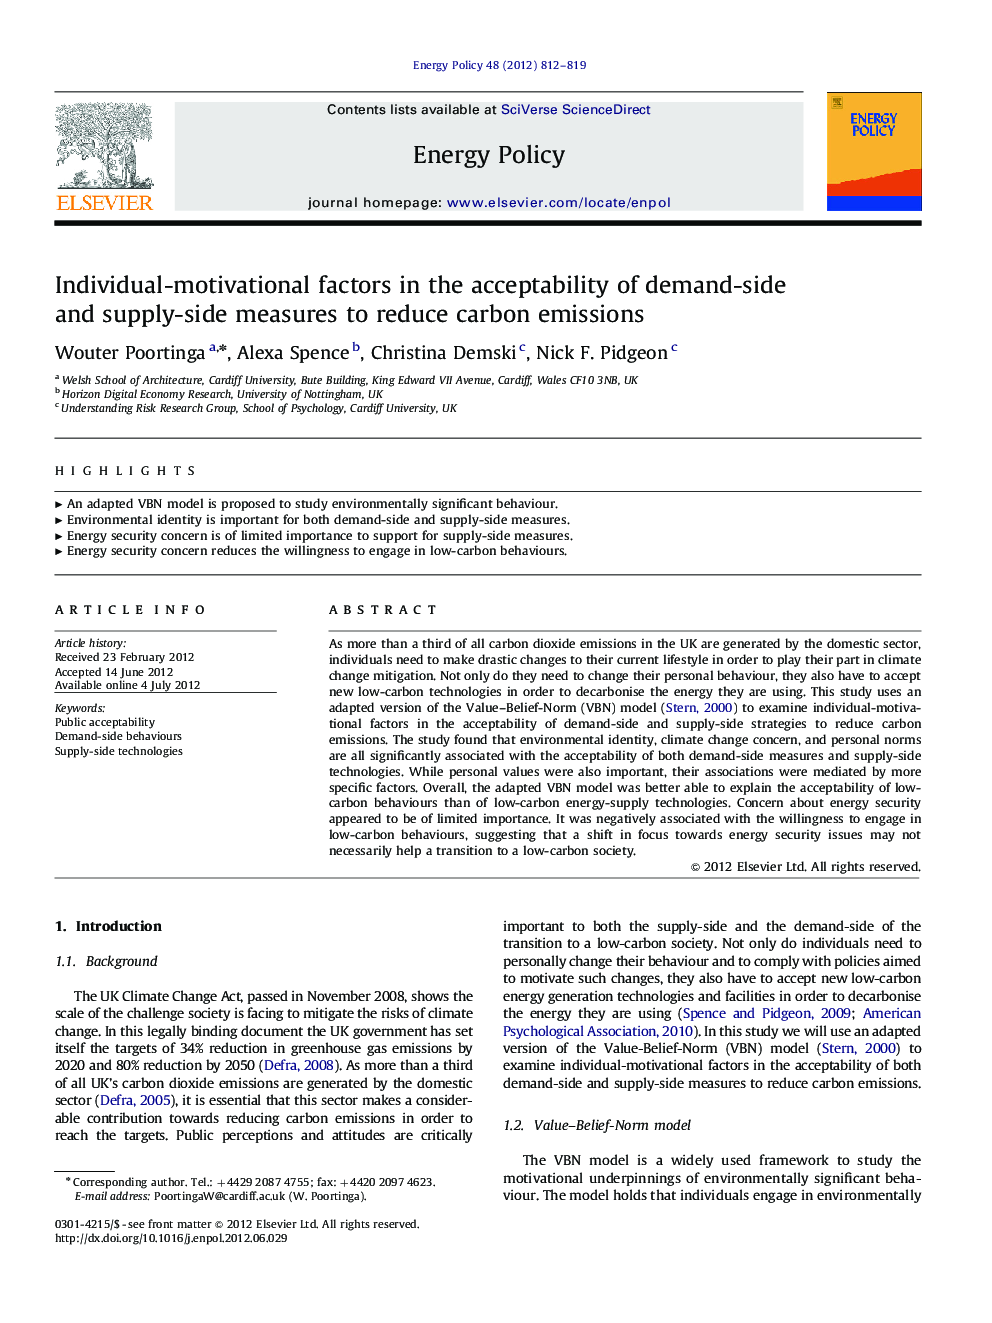 Individual-motivational factors in the acceptability of demand-side and supply-side measures to reduce carbon emissions